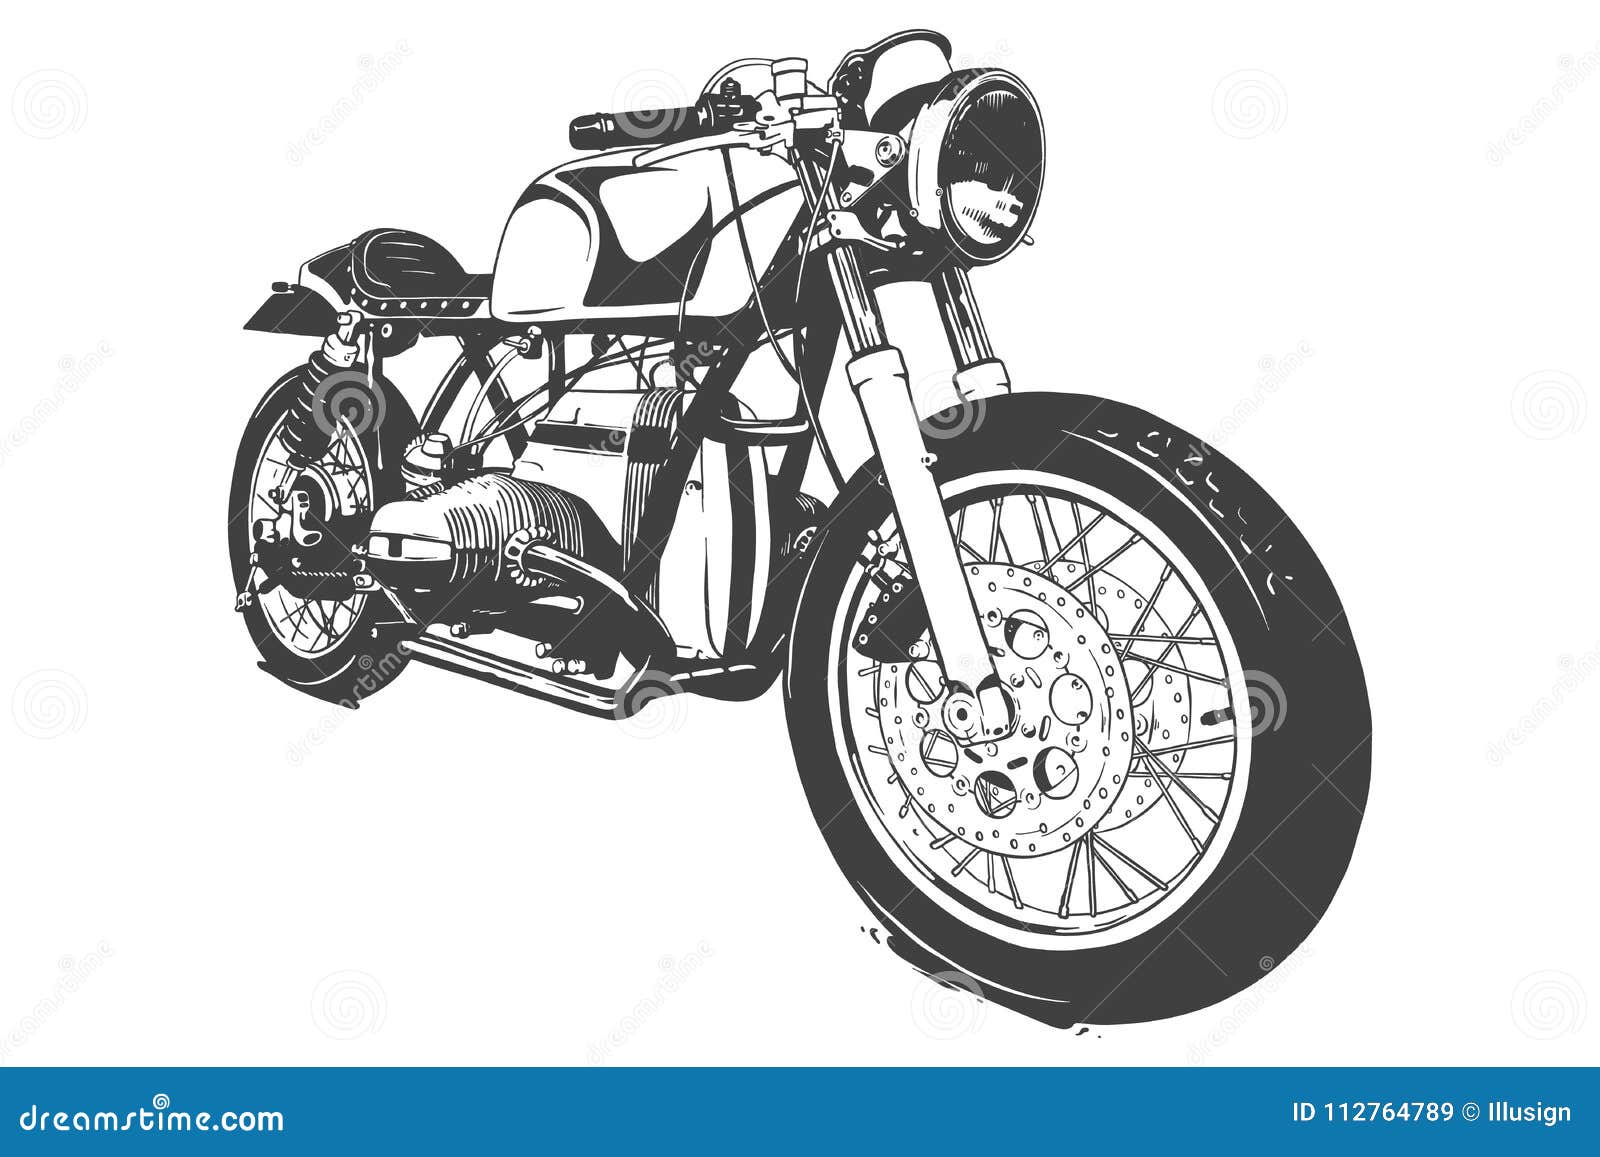 vintage custom motorcicle graphic poster .